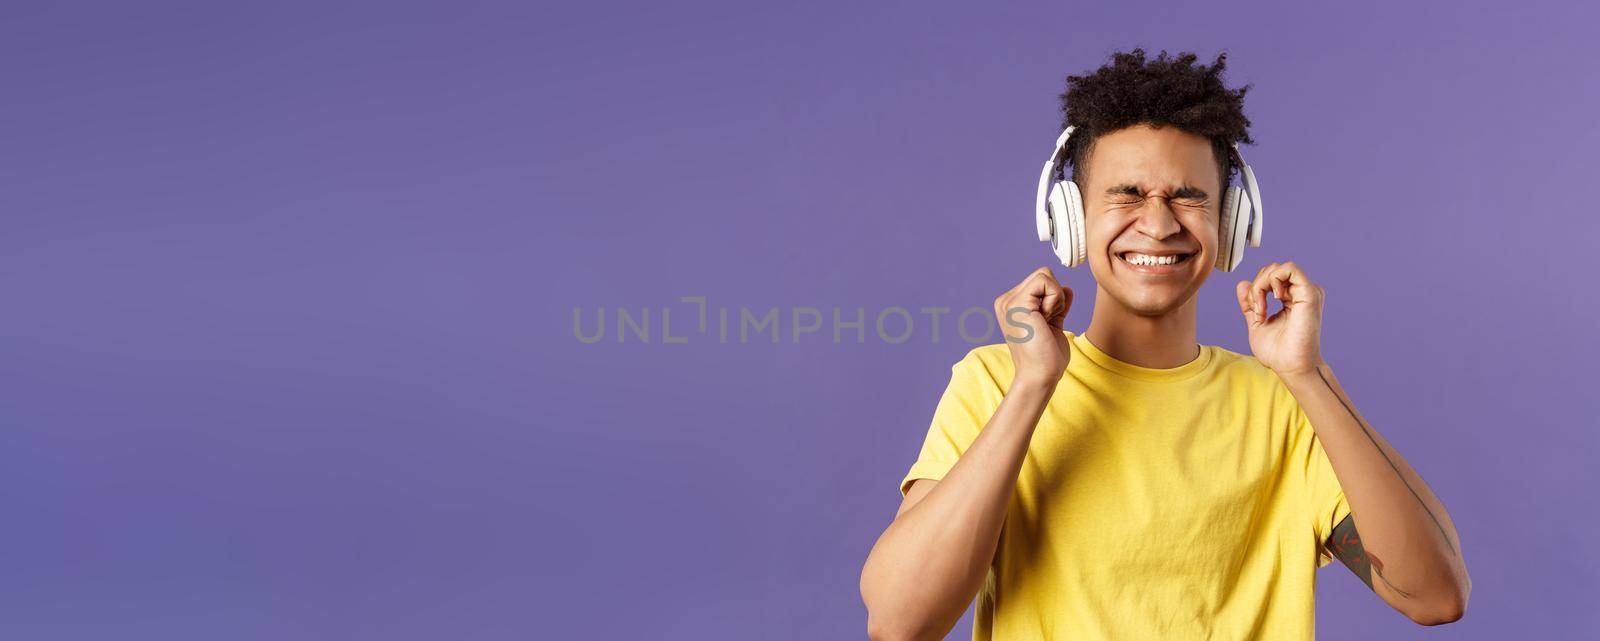 Portrait of pleased, excited young man enjoying nice quality awesome beats in headphones, close eyes and smiling rejoicing, dancing over cool new song, listen music over purple background.